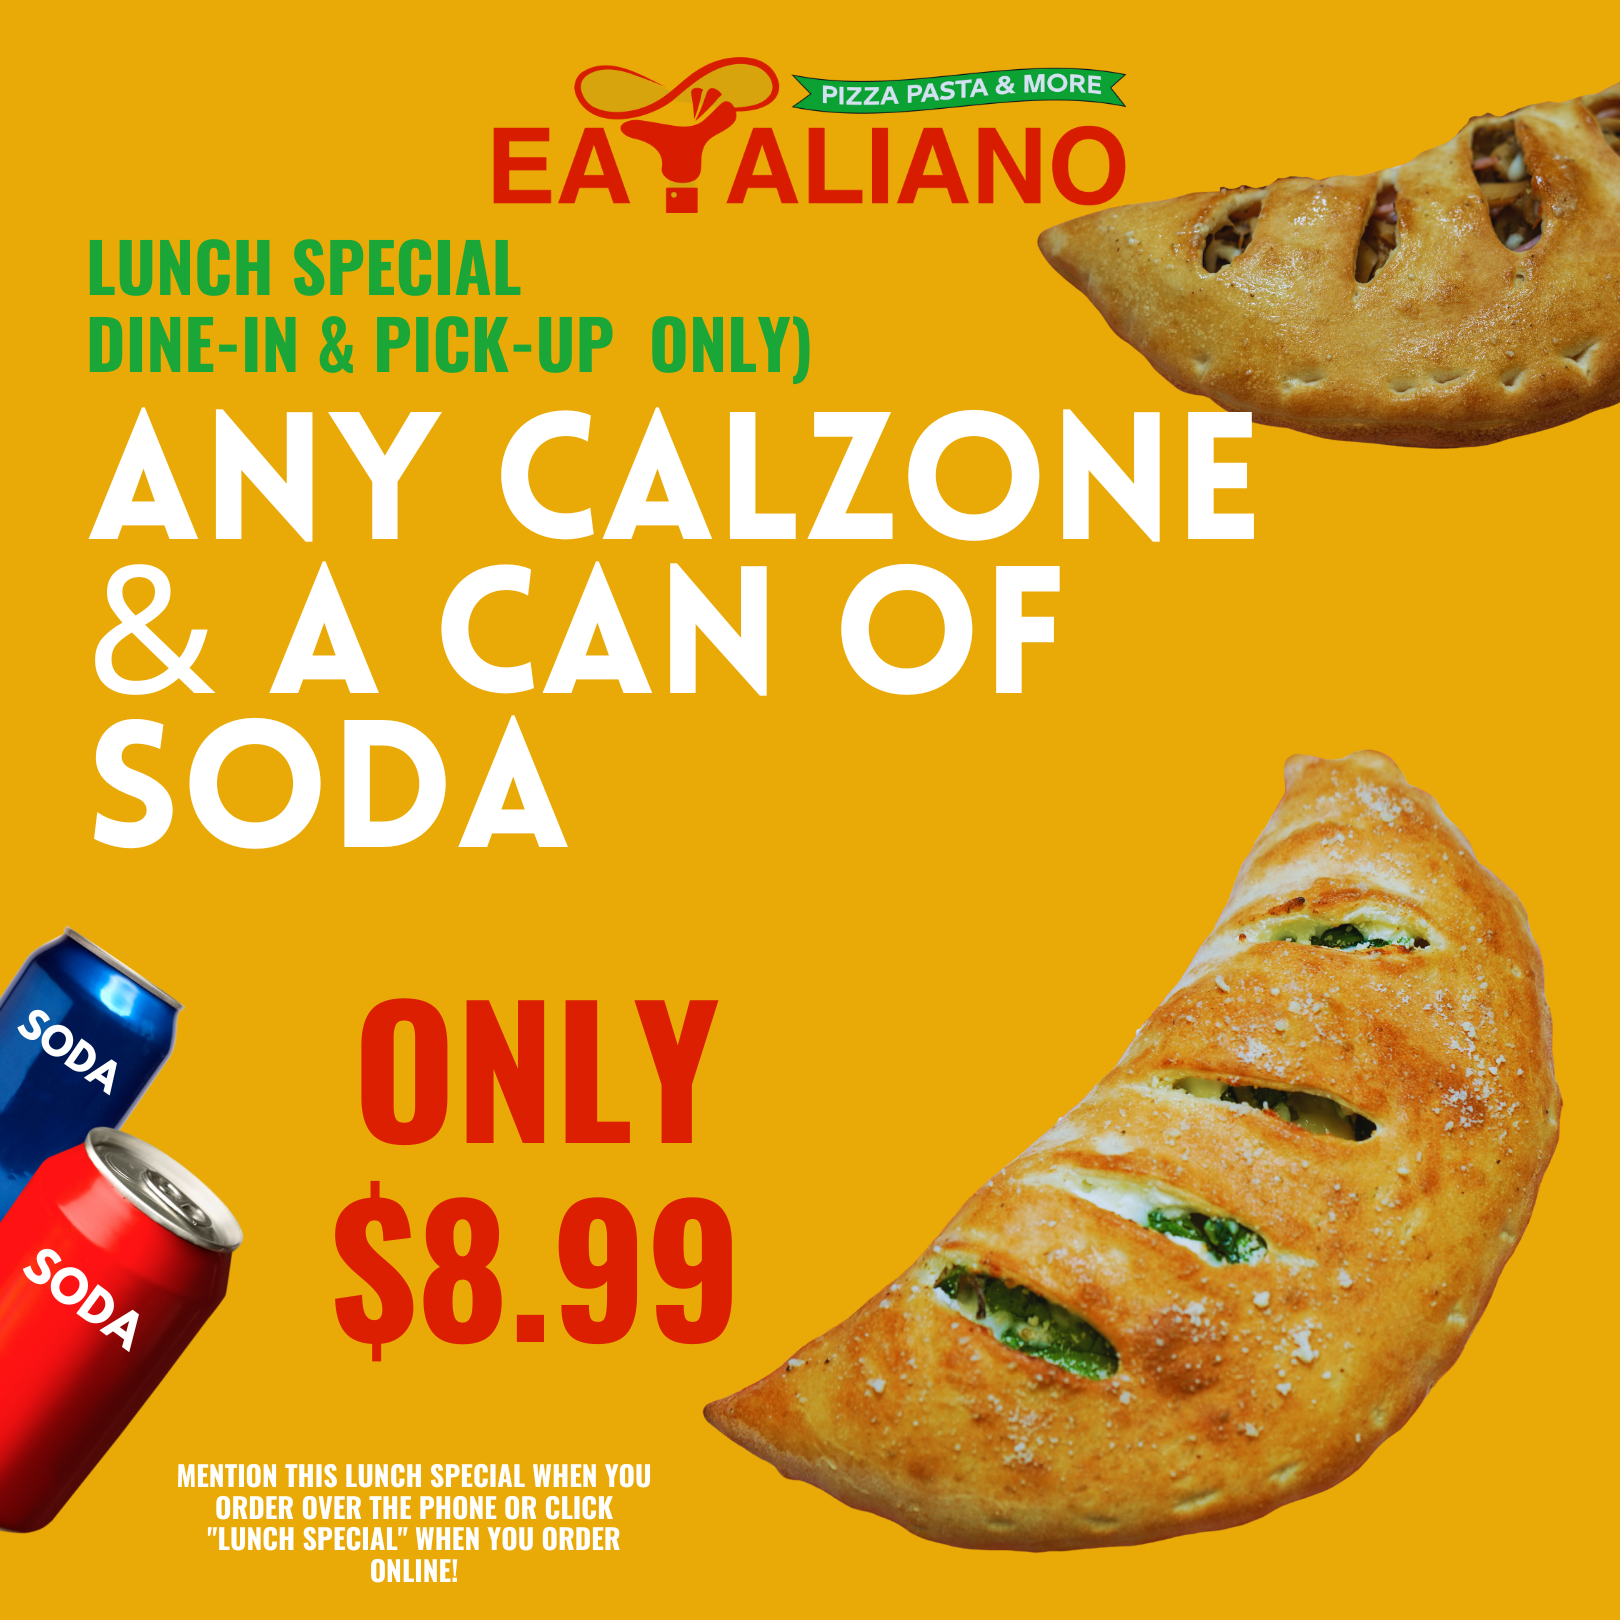 Any Calzone & a Can of Soda $8.99